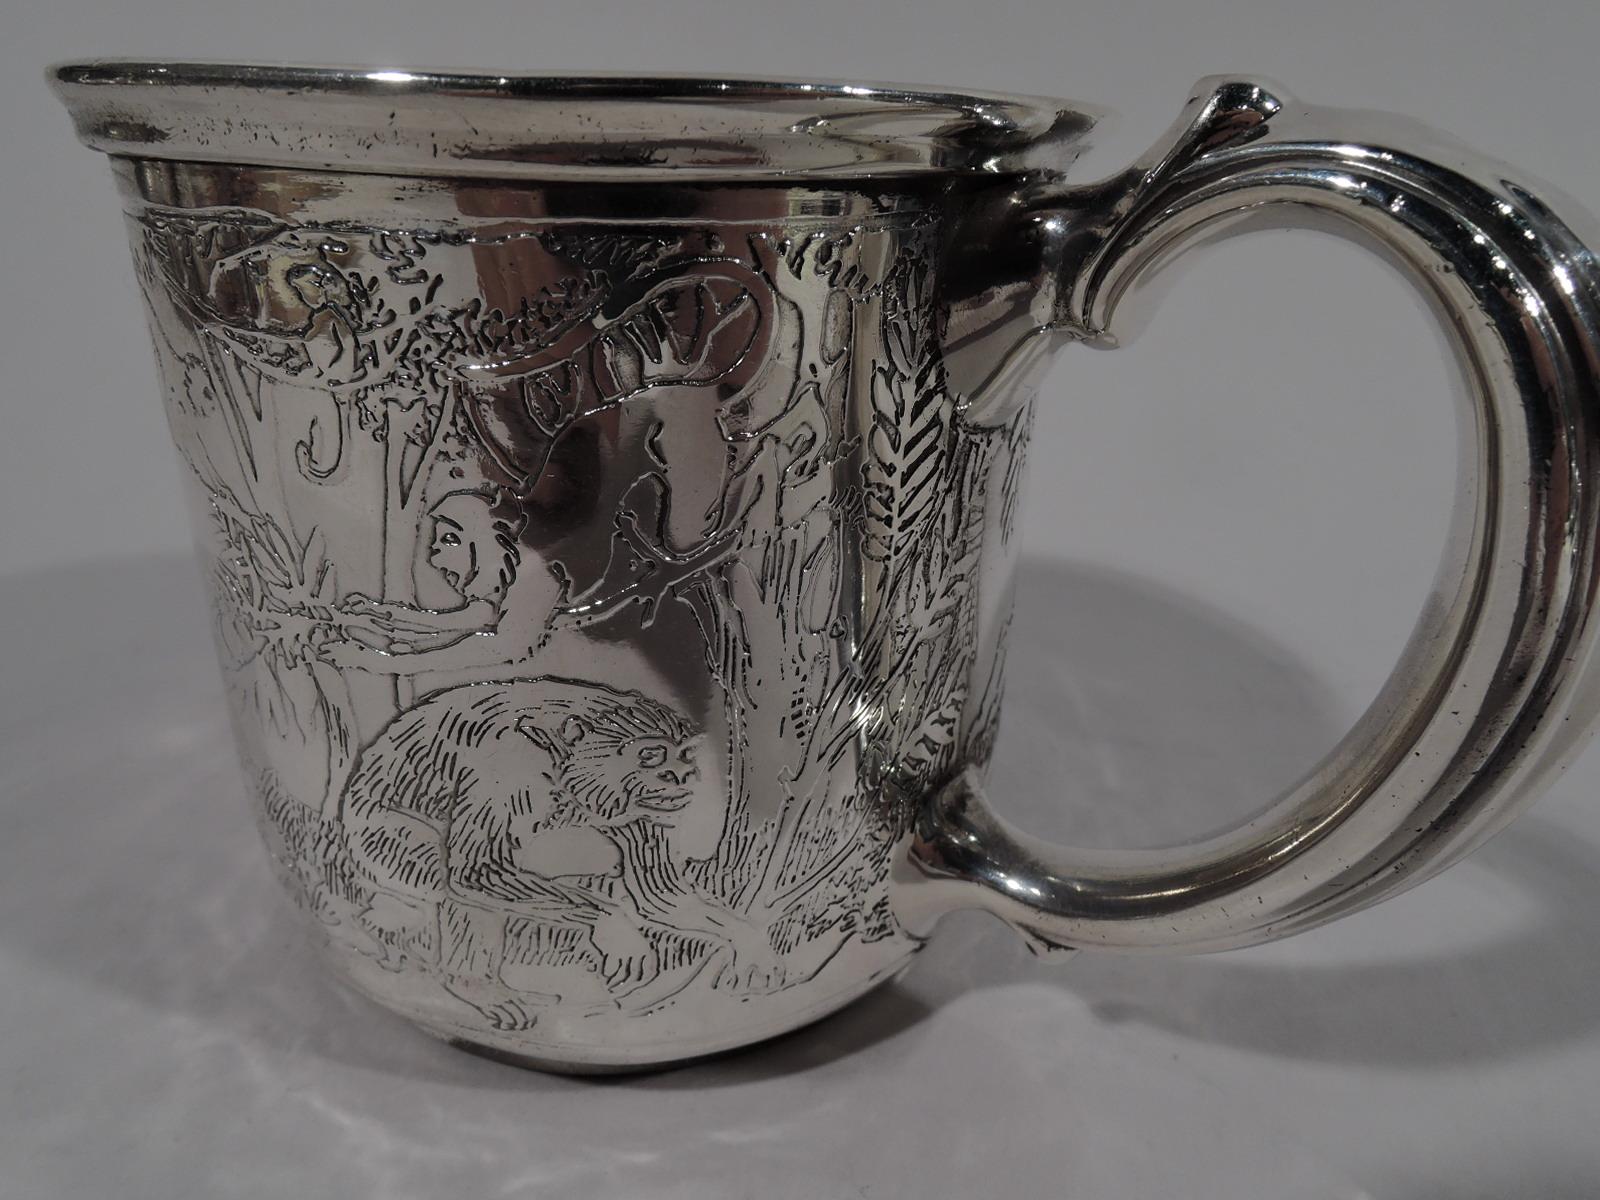 Art Deco sterling silver 3-piece baby set. Made by Reed & Barton in Taunton, Mass., circa 1920, This set comprises mug, cereal bowl, and plate. Acid-etched safari with leaping gazelles, striding giraffes, wading hippos, and plodding elephants. A